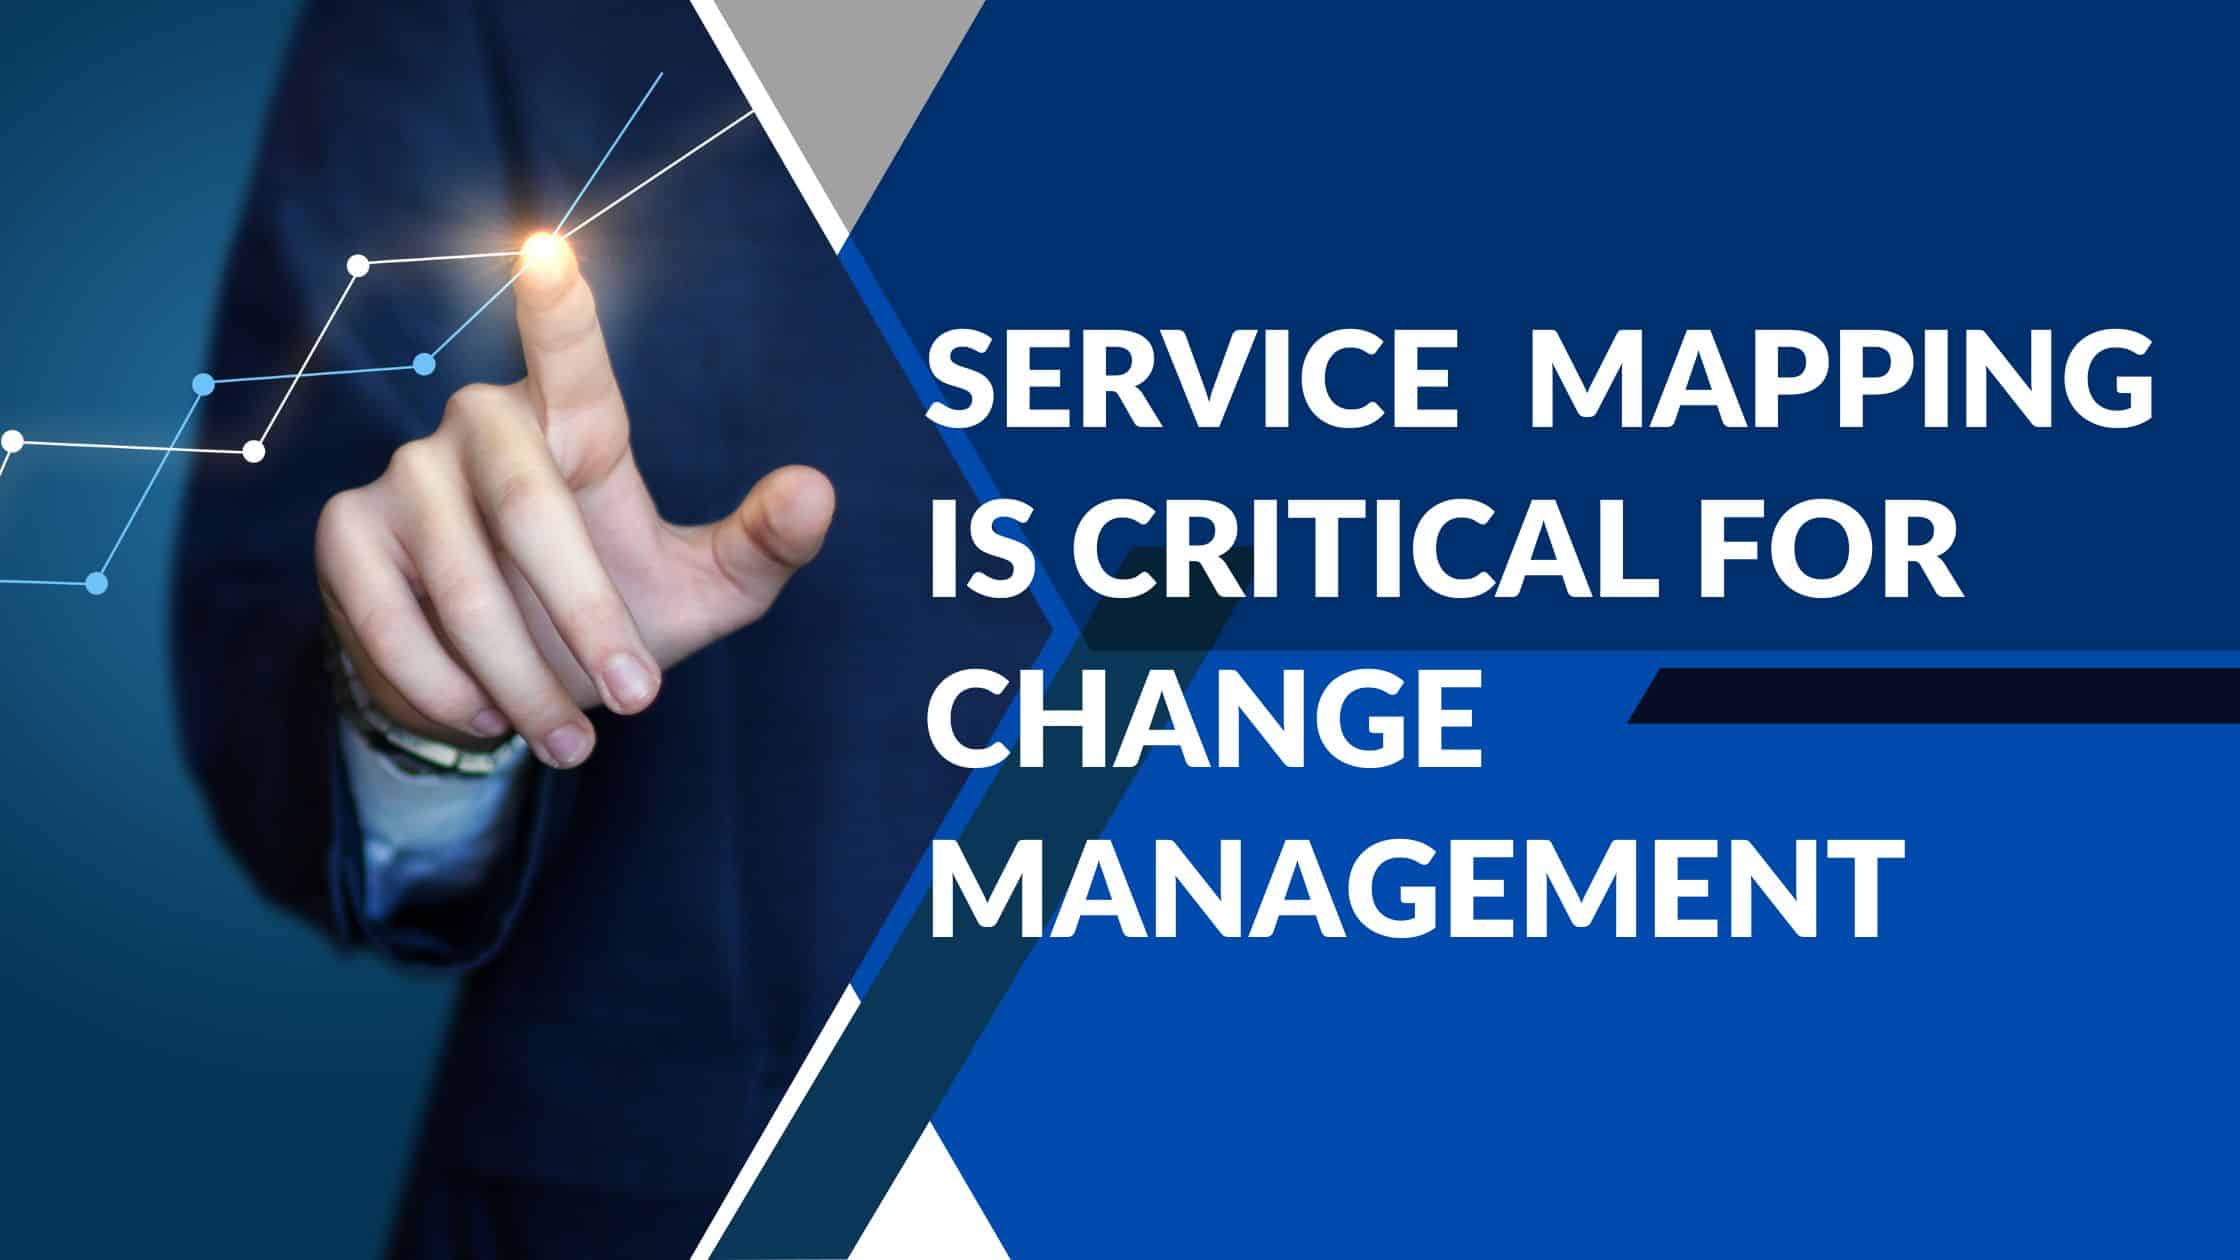 Service mapping change management